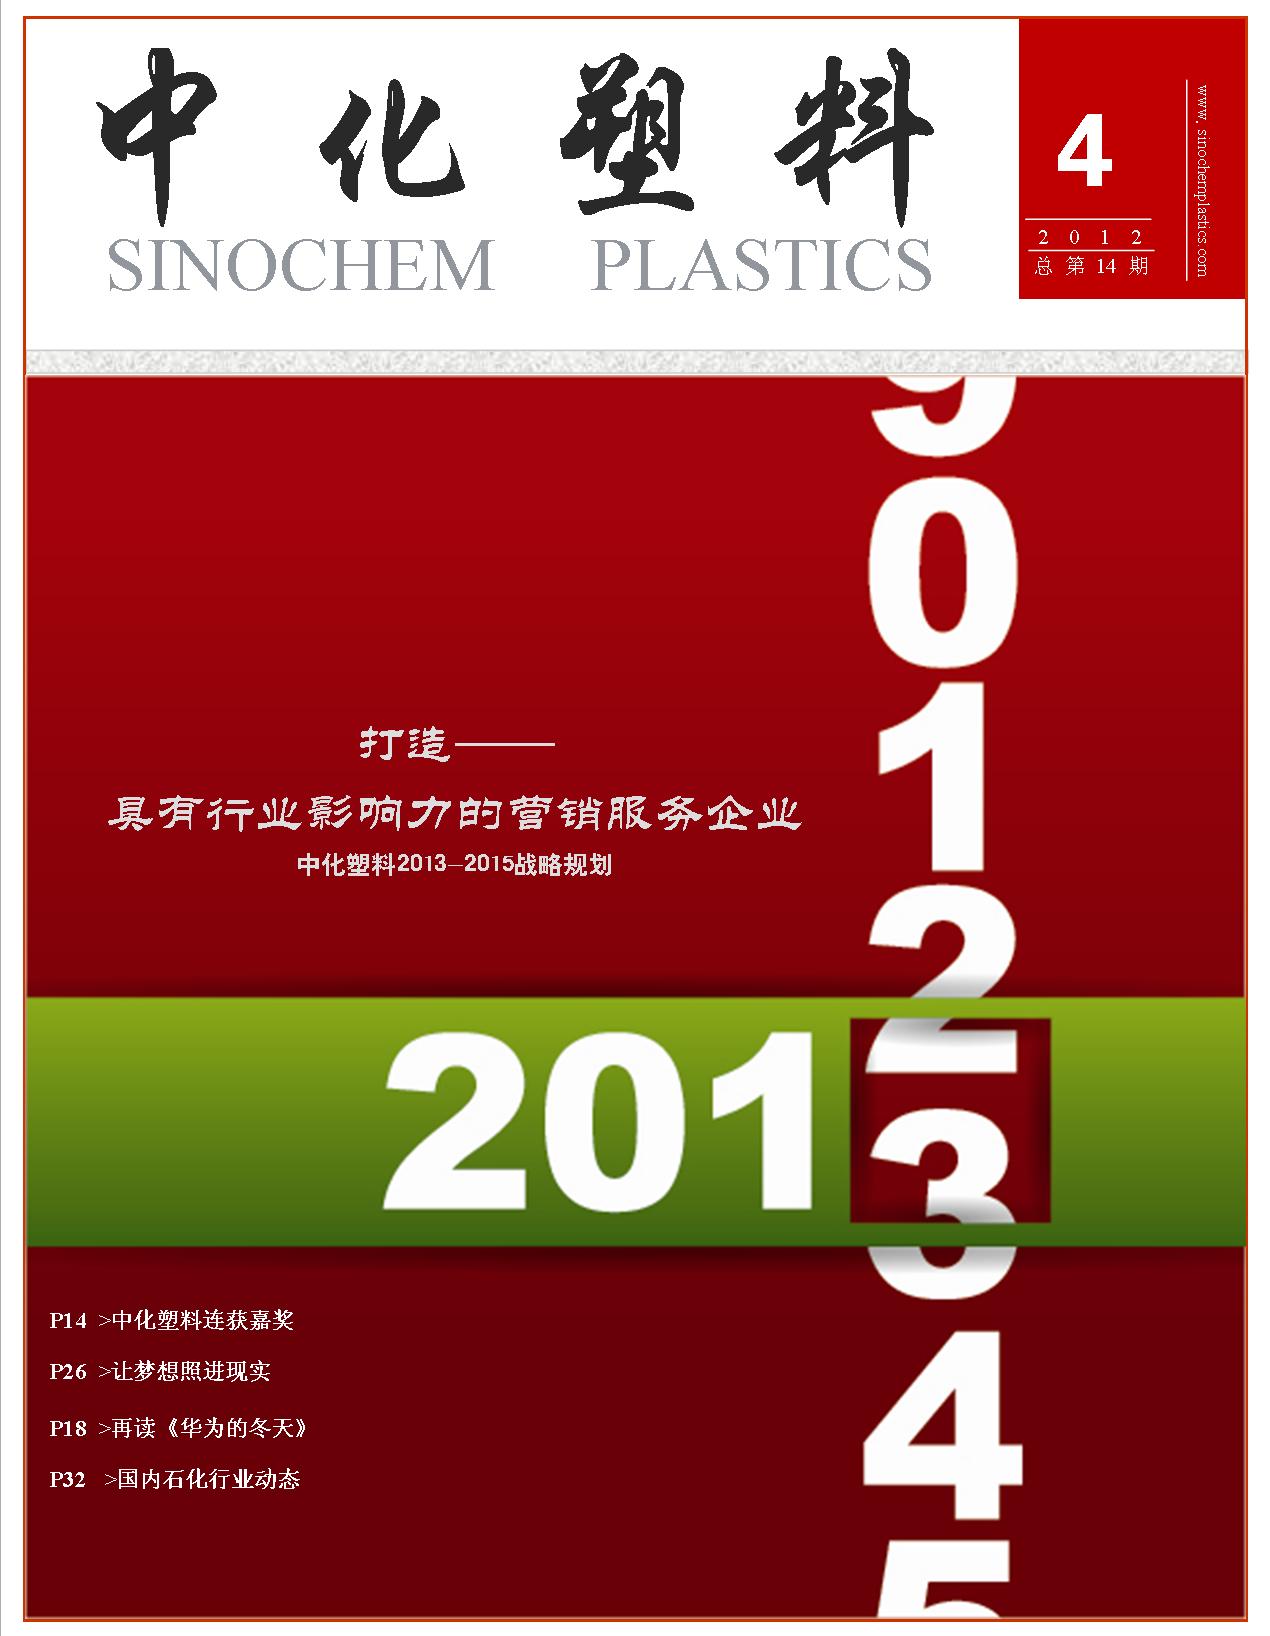 4st issue - 2012